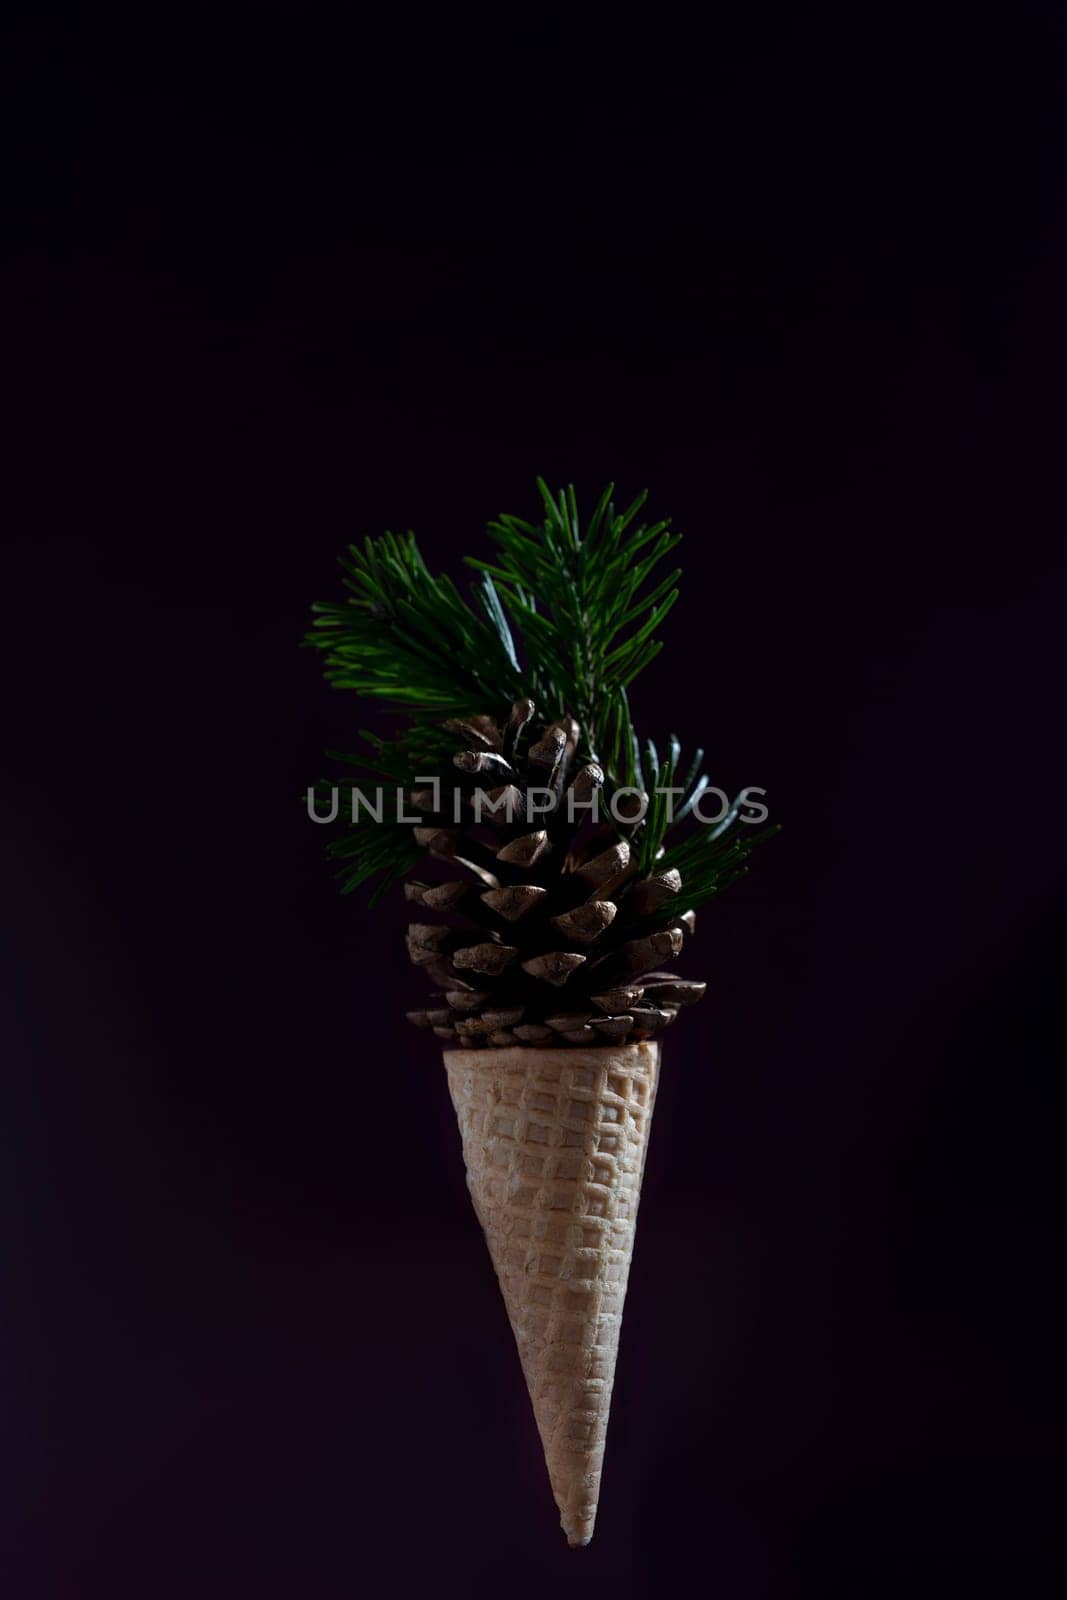 A cone shaped ice cream cone with pine needles on top.